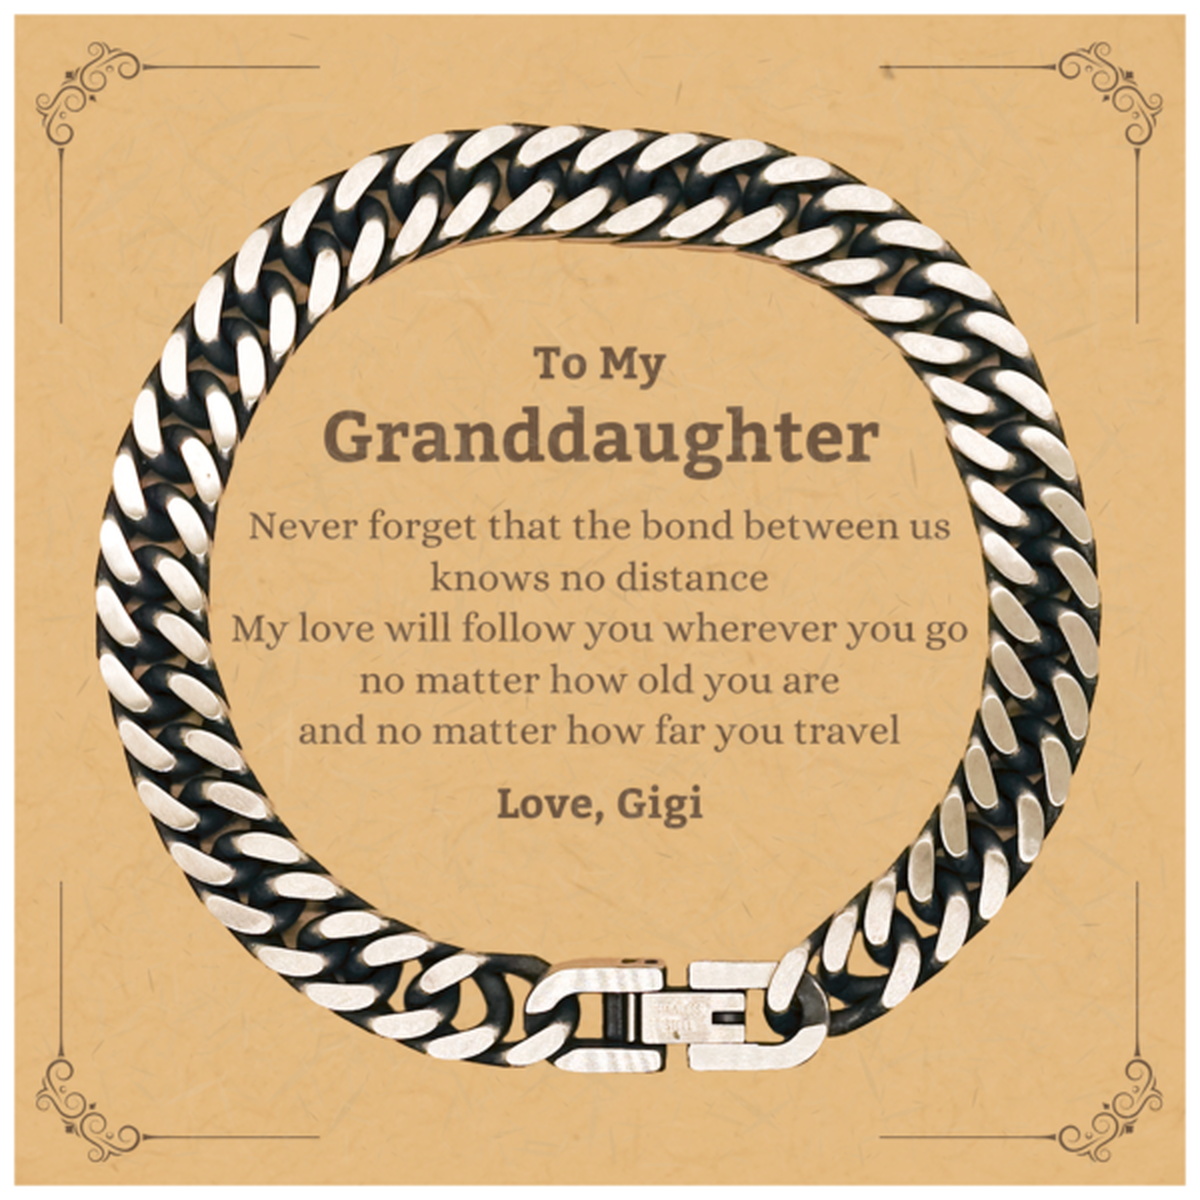 Granddaughter Birthday Gifts from Gigi, Adjustable Cuban Link Chain Bracelet for Granddaughter Christmas Graduation Unique Gifts Granddaughter Never forget that the bond between us knows no distance. Love, Gigi